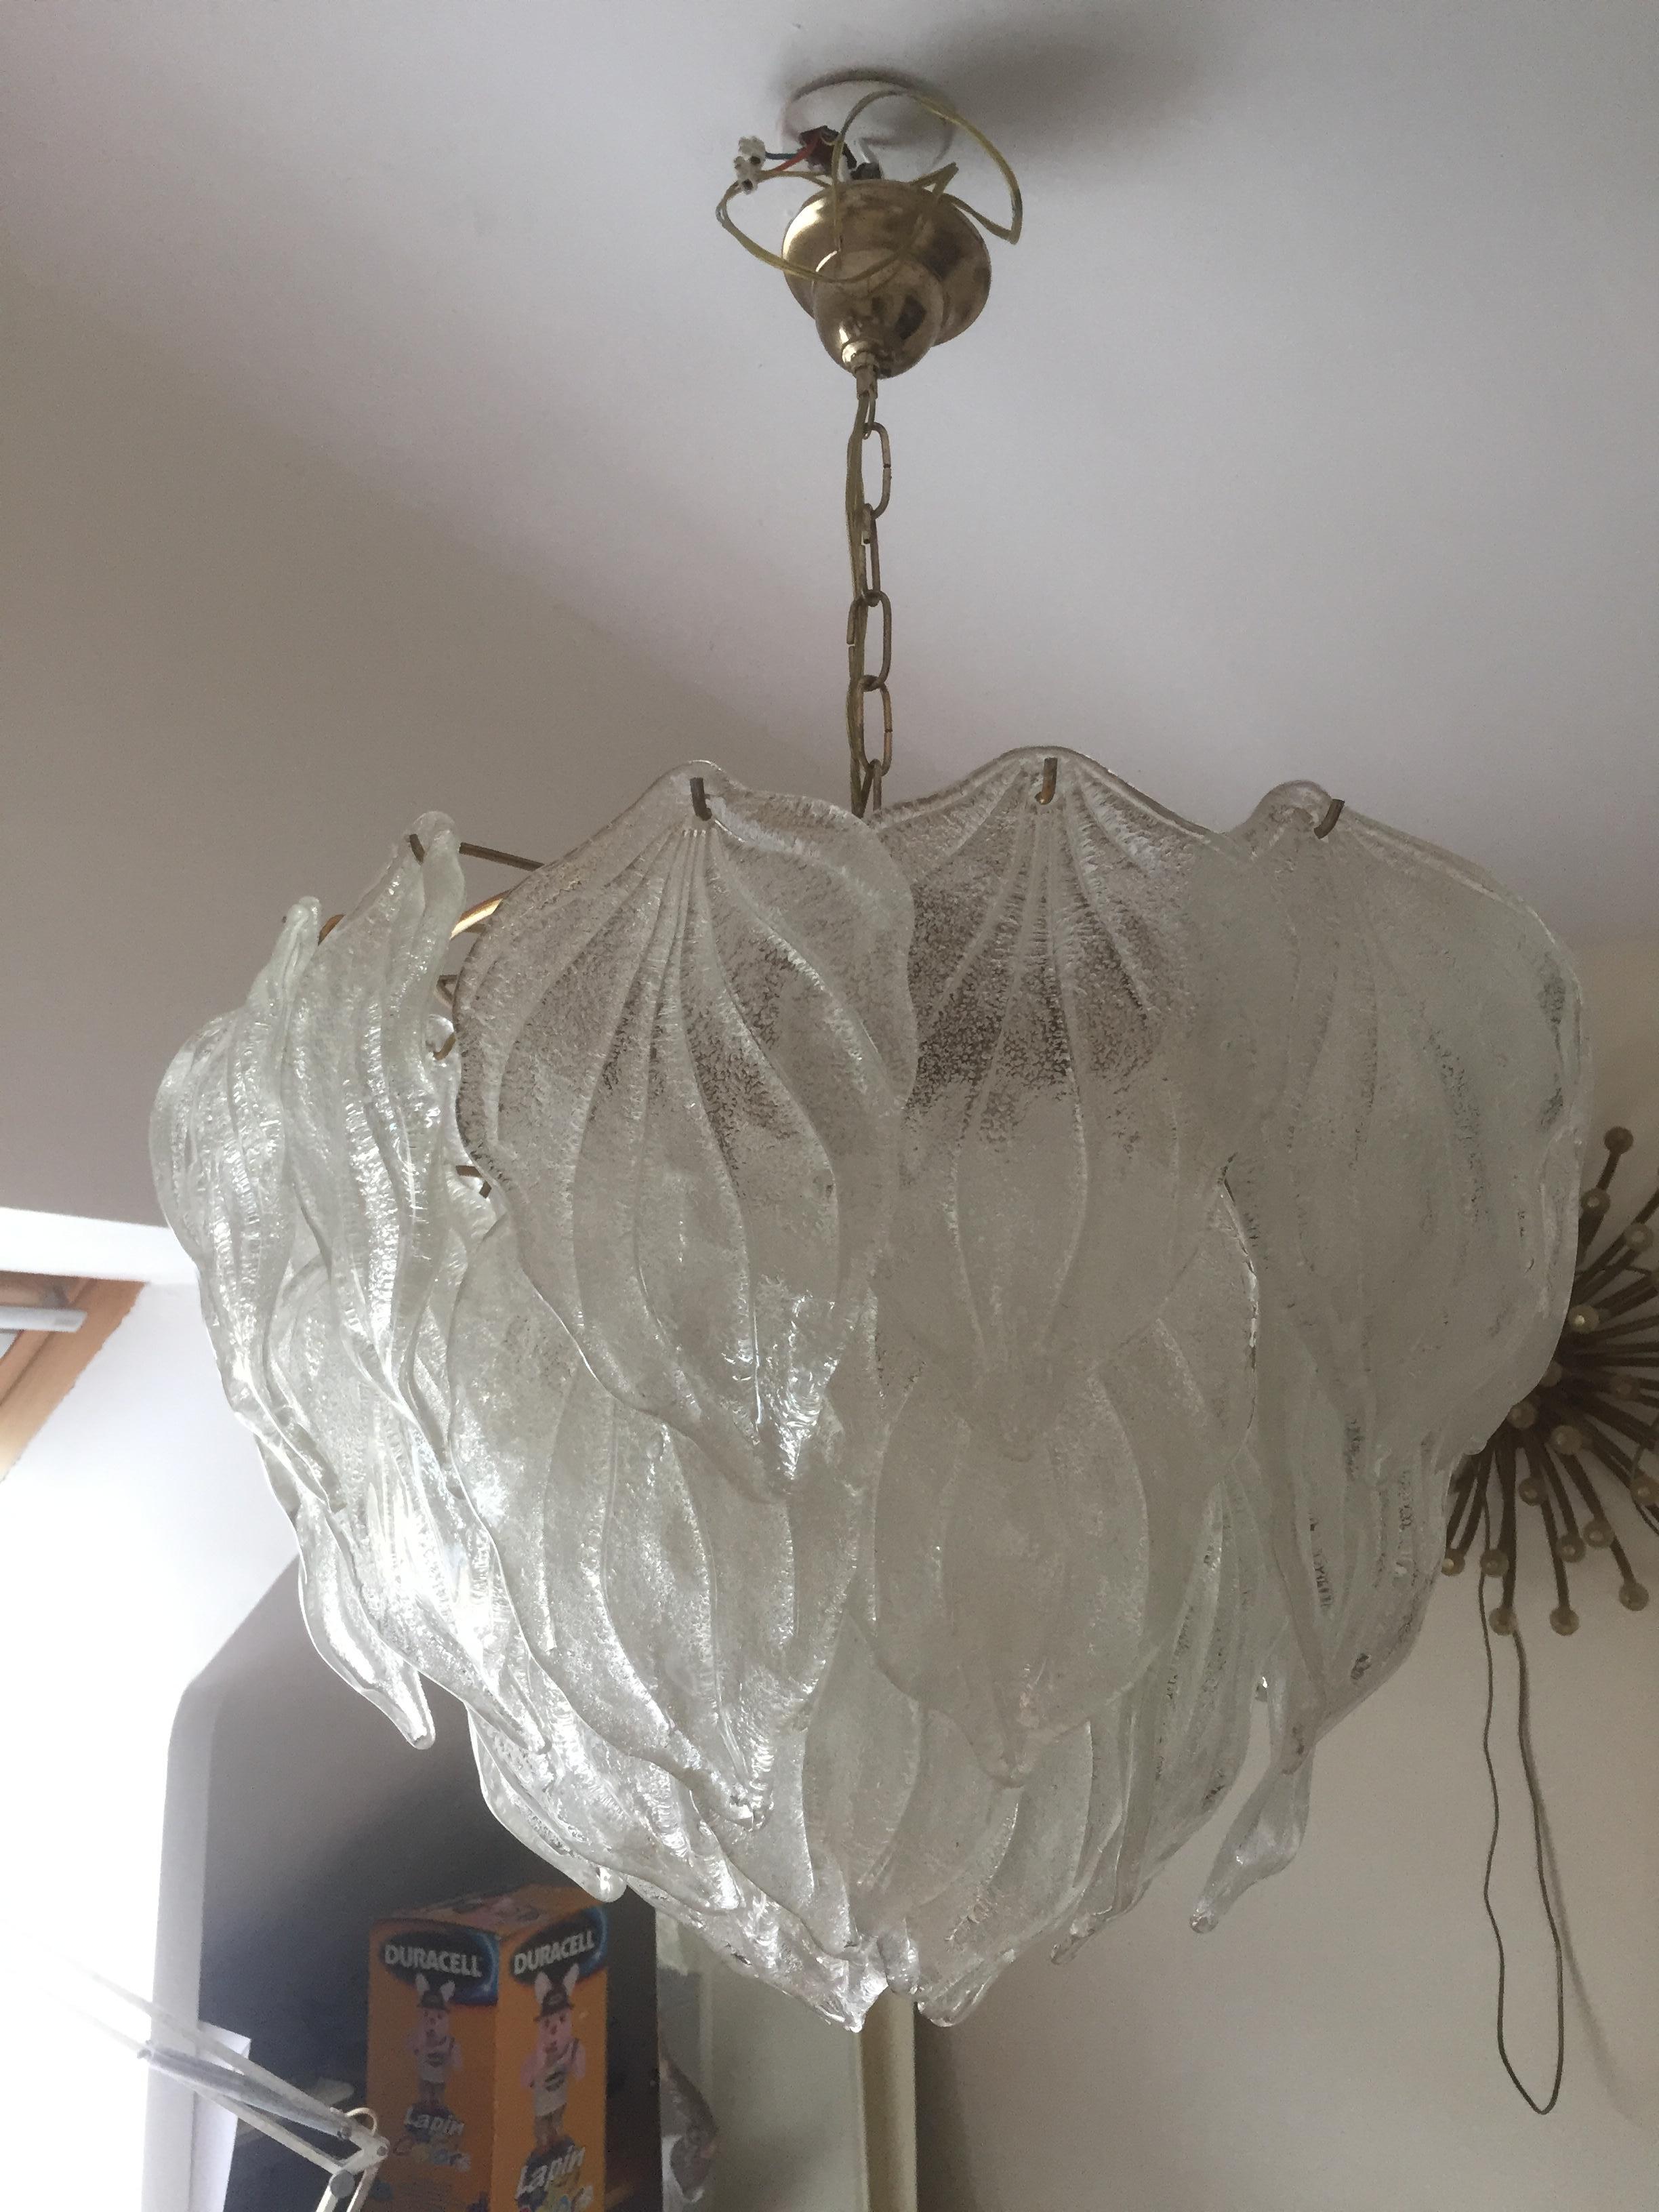 Large Murano chandelier
Frosted glass sheets
42 sheets + 3 spare
Measures: 60 cm in diameter
90 cm high,
circa 1972.